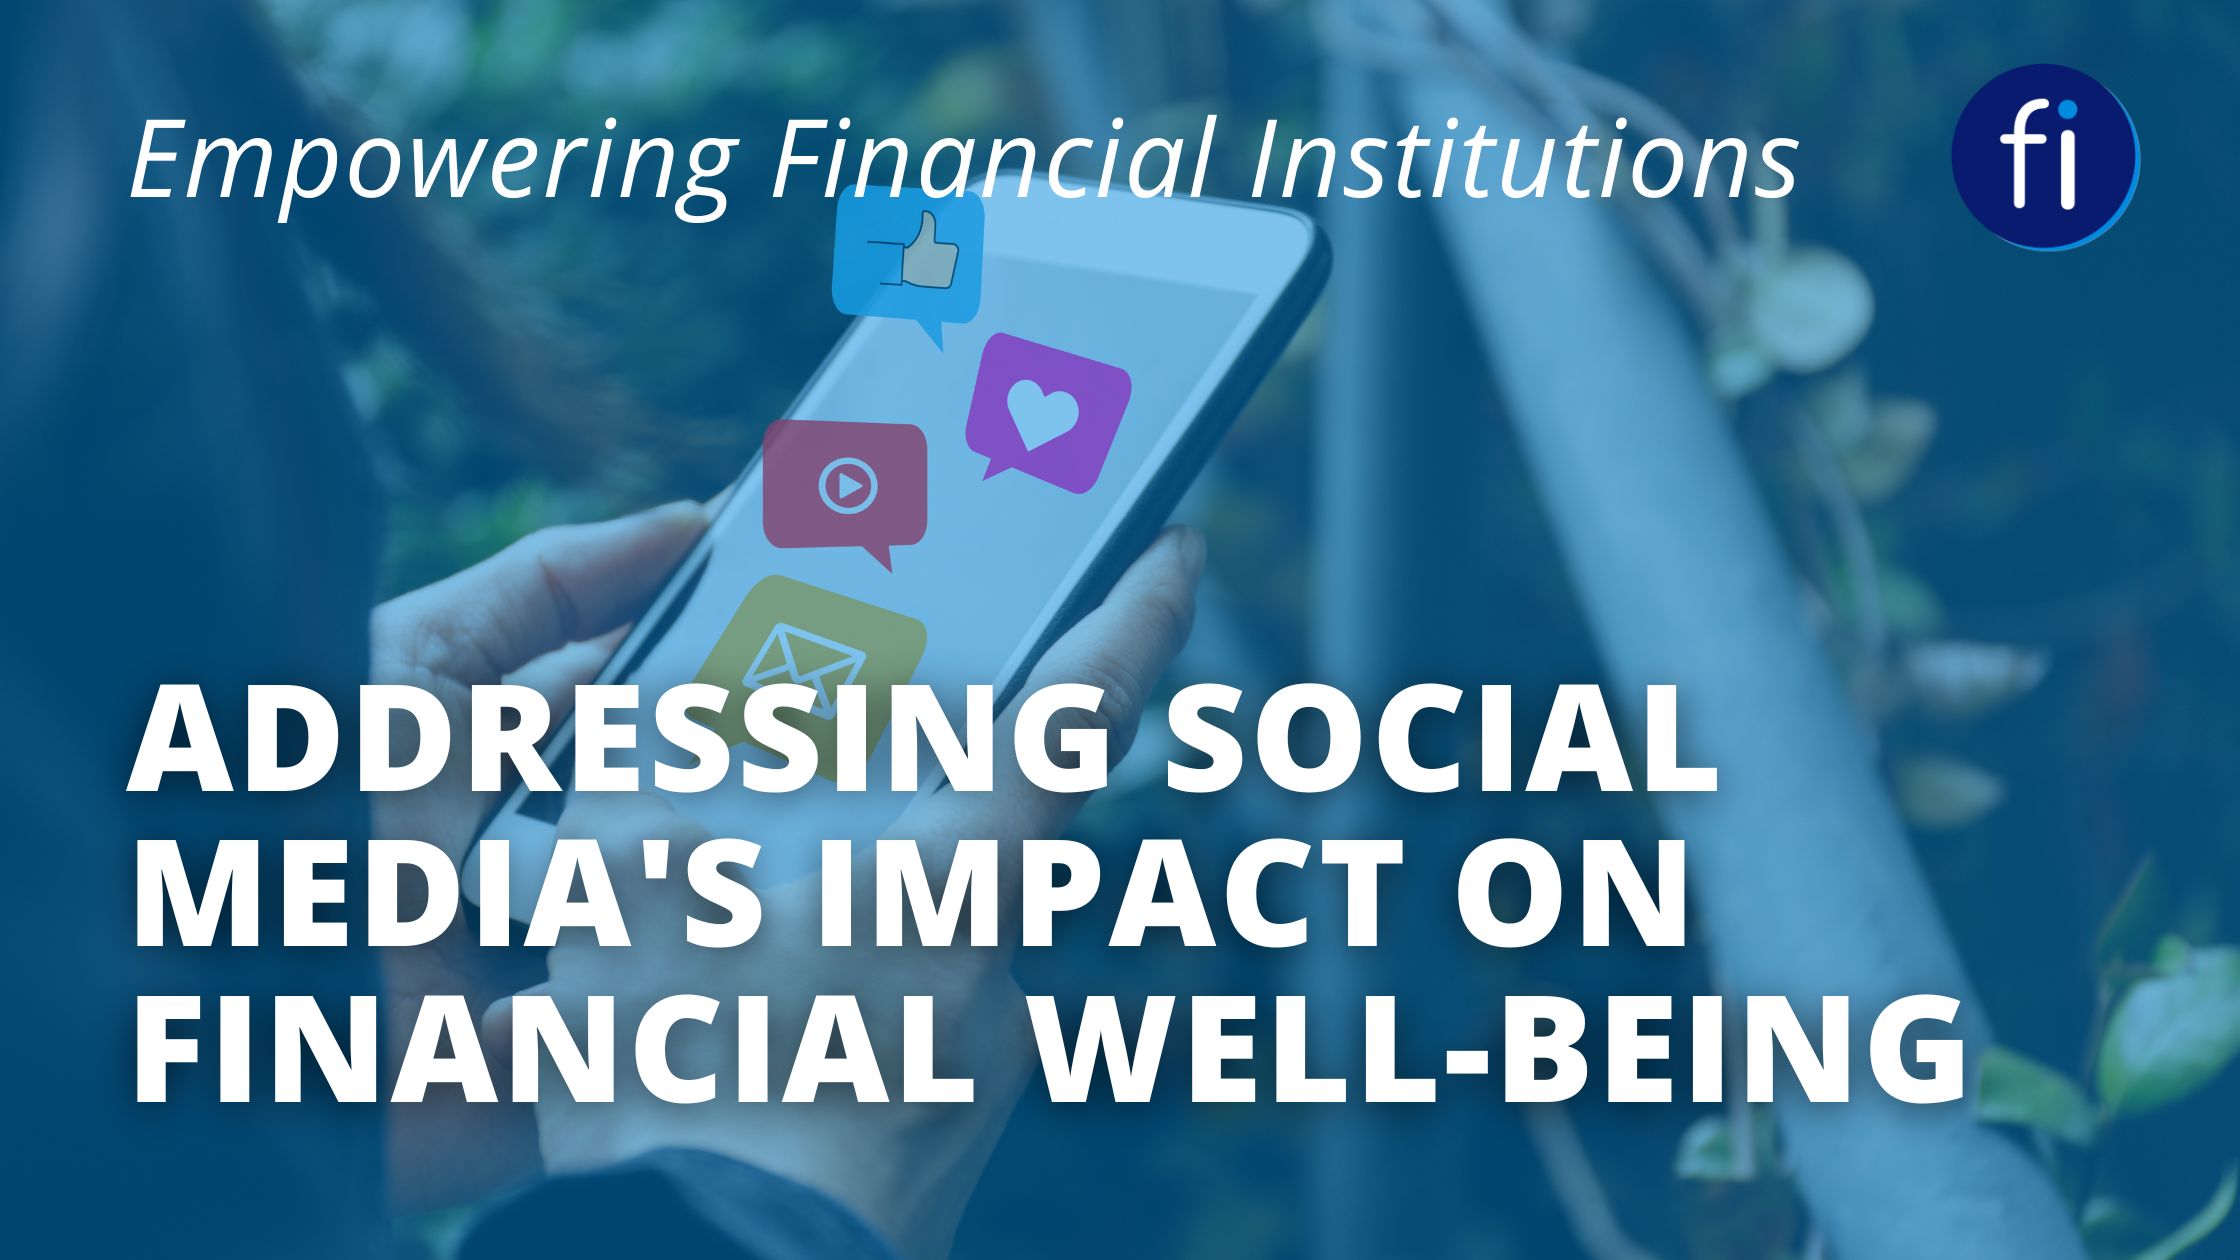 Empowering Financial Institutions: Addressing Social Media's Impact on Financial Well-being